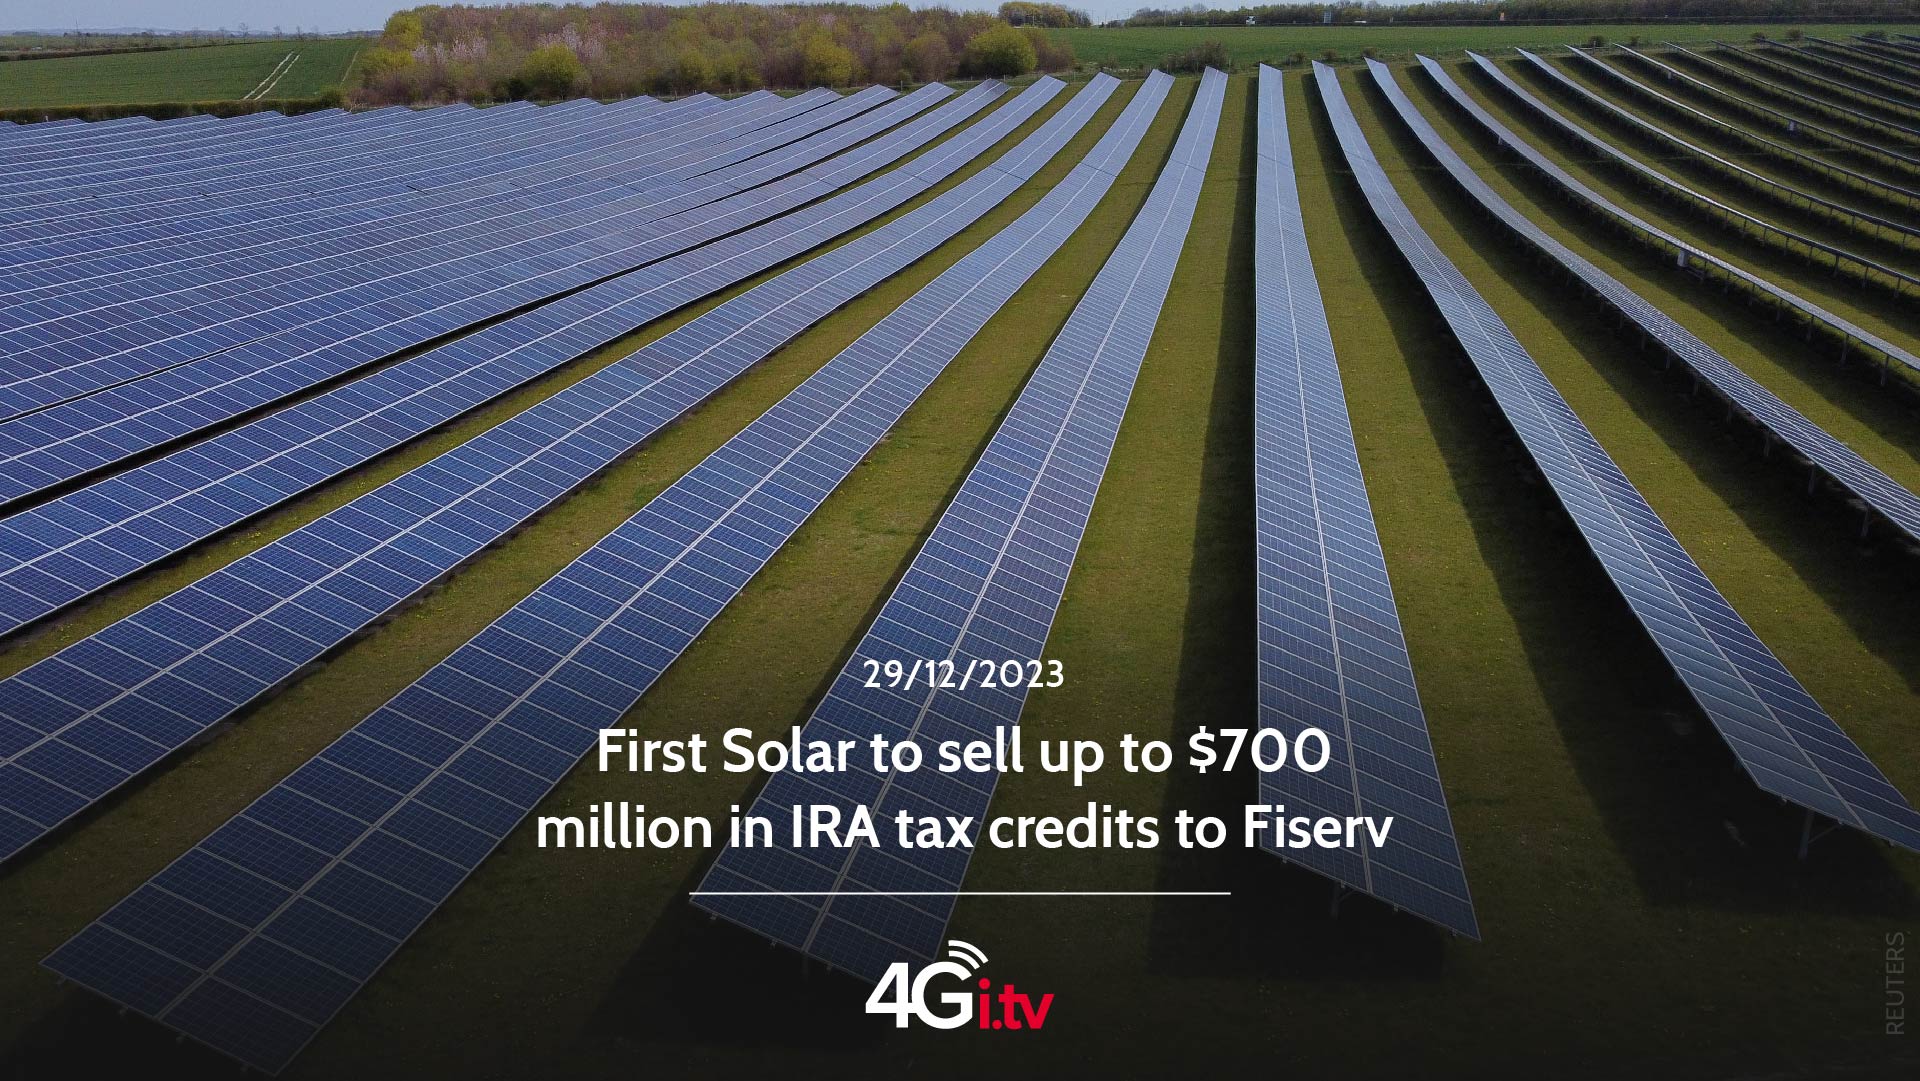 Подробнее о статье First Solar to sell up to $700 million in IRA tax credits to Fiserv